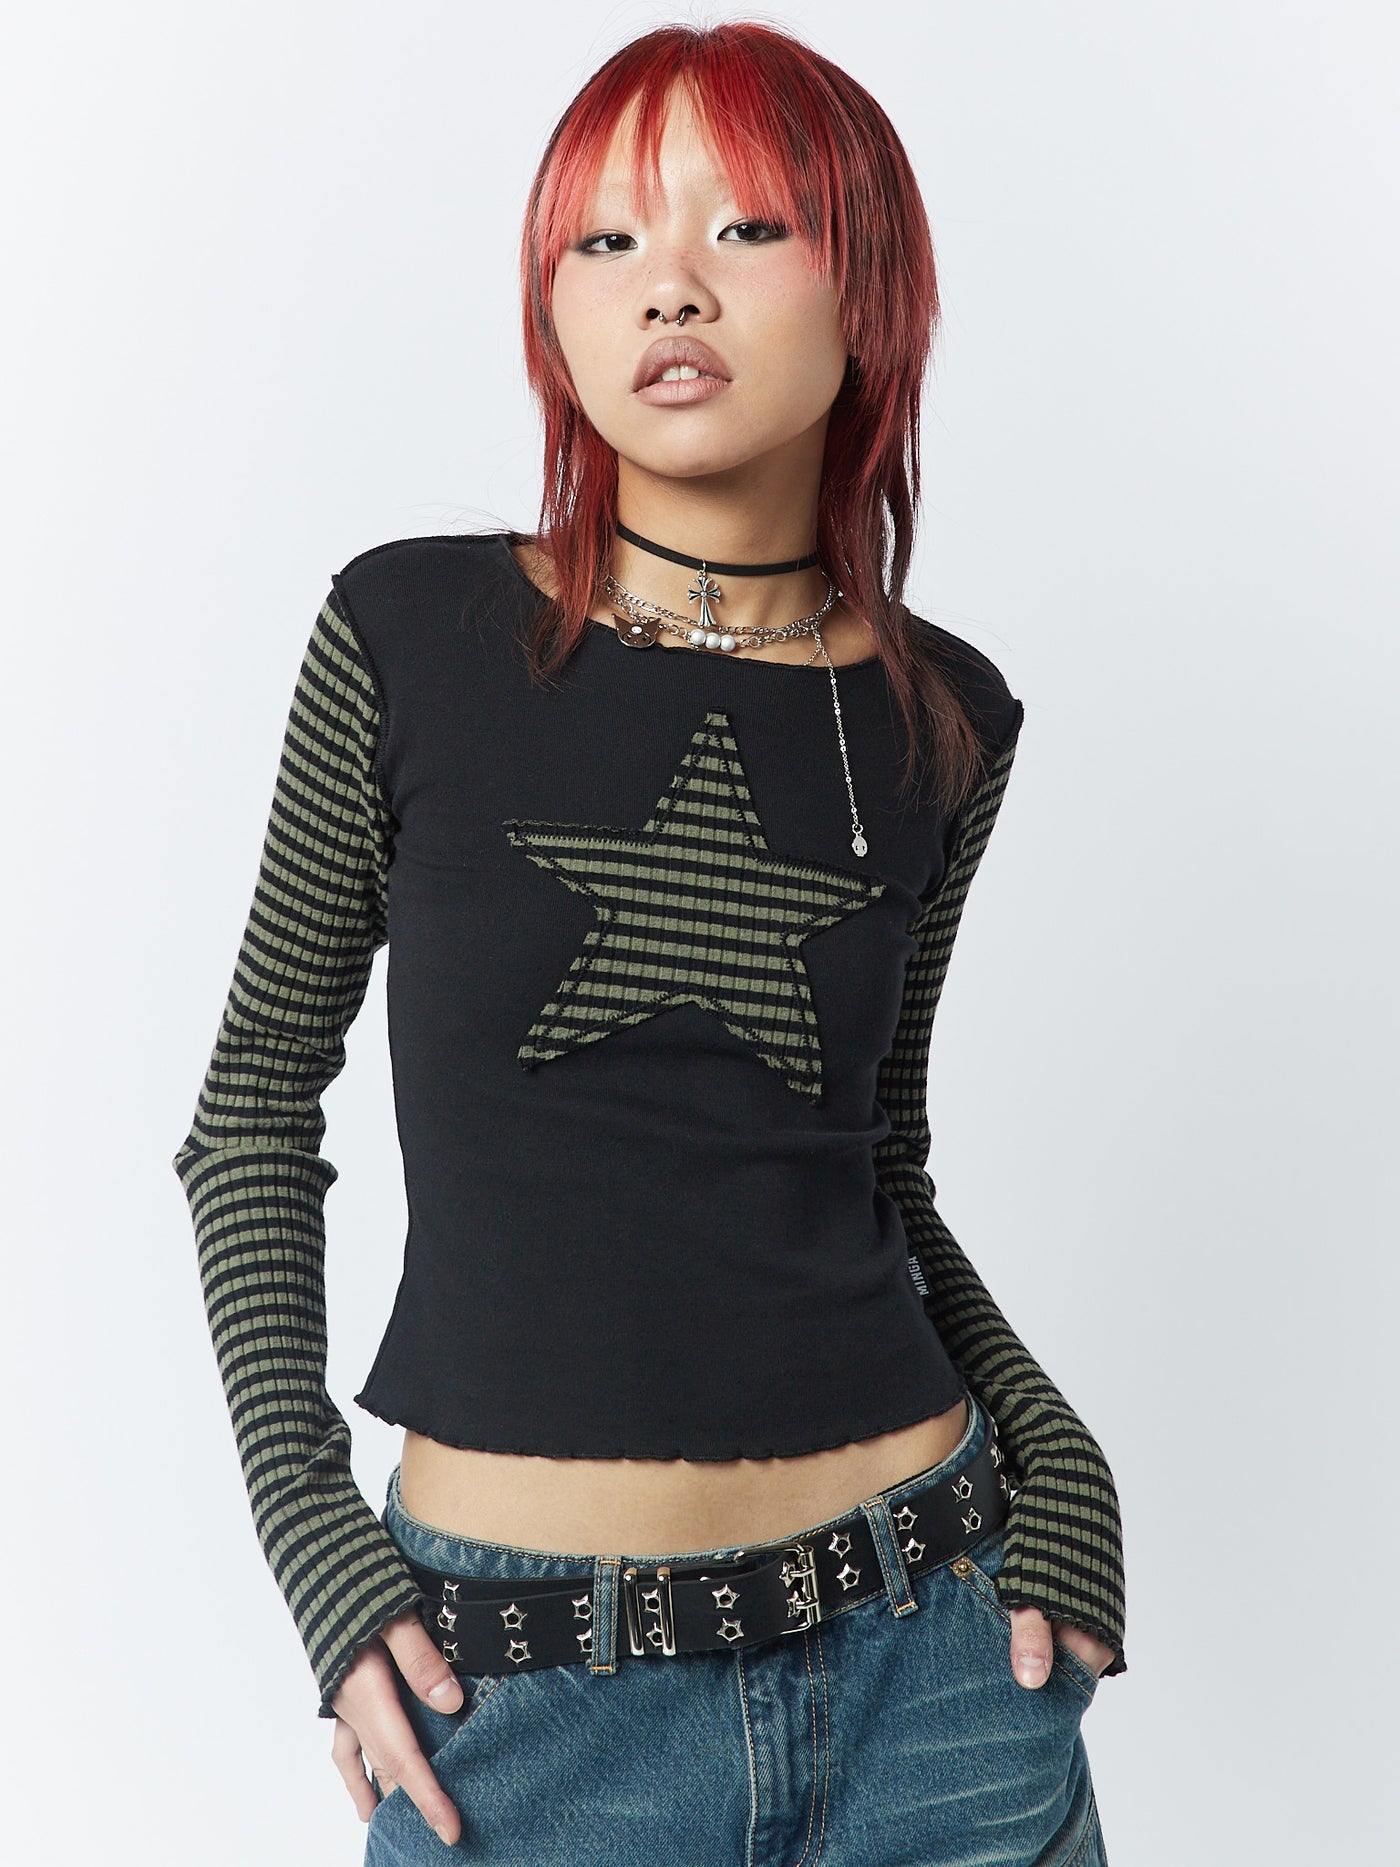 A green and black striped long sleeve top by Minga London. Featuring a Star graphic, this top offers a trendy and stylish look with a touch of edginess.